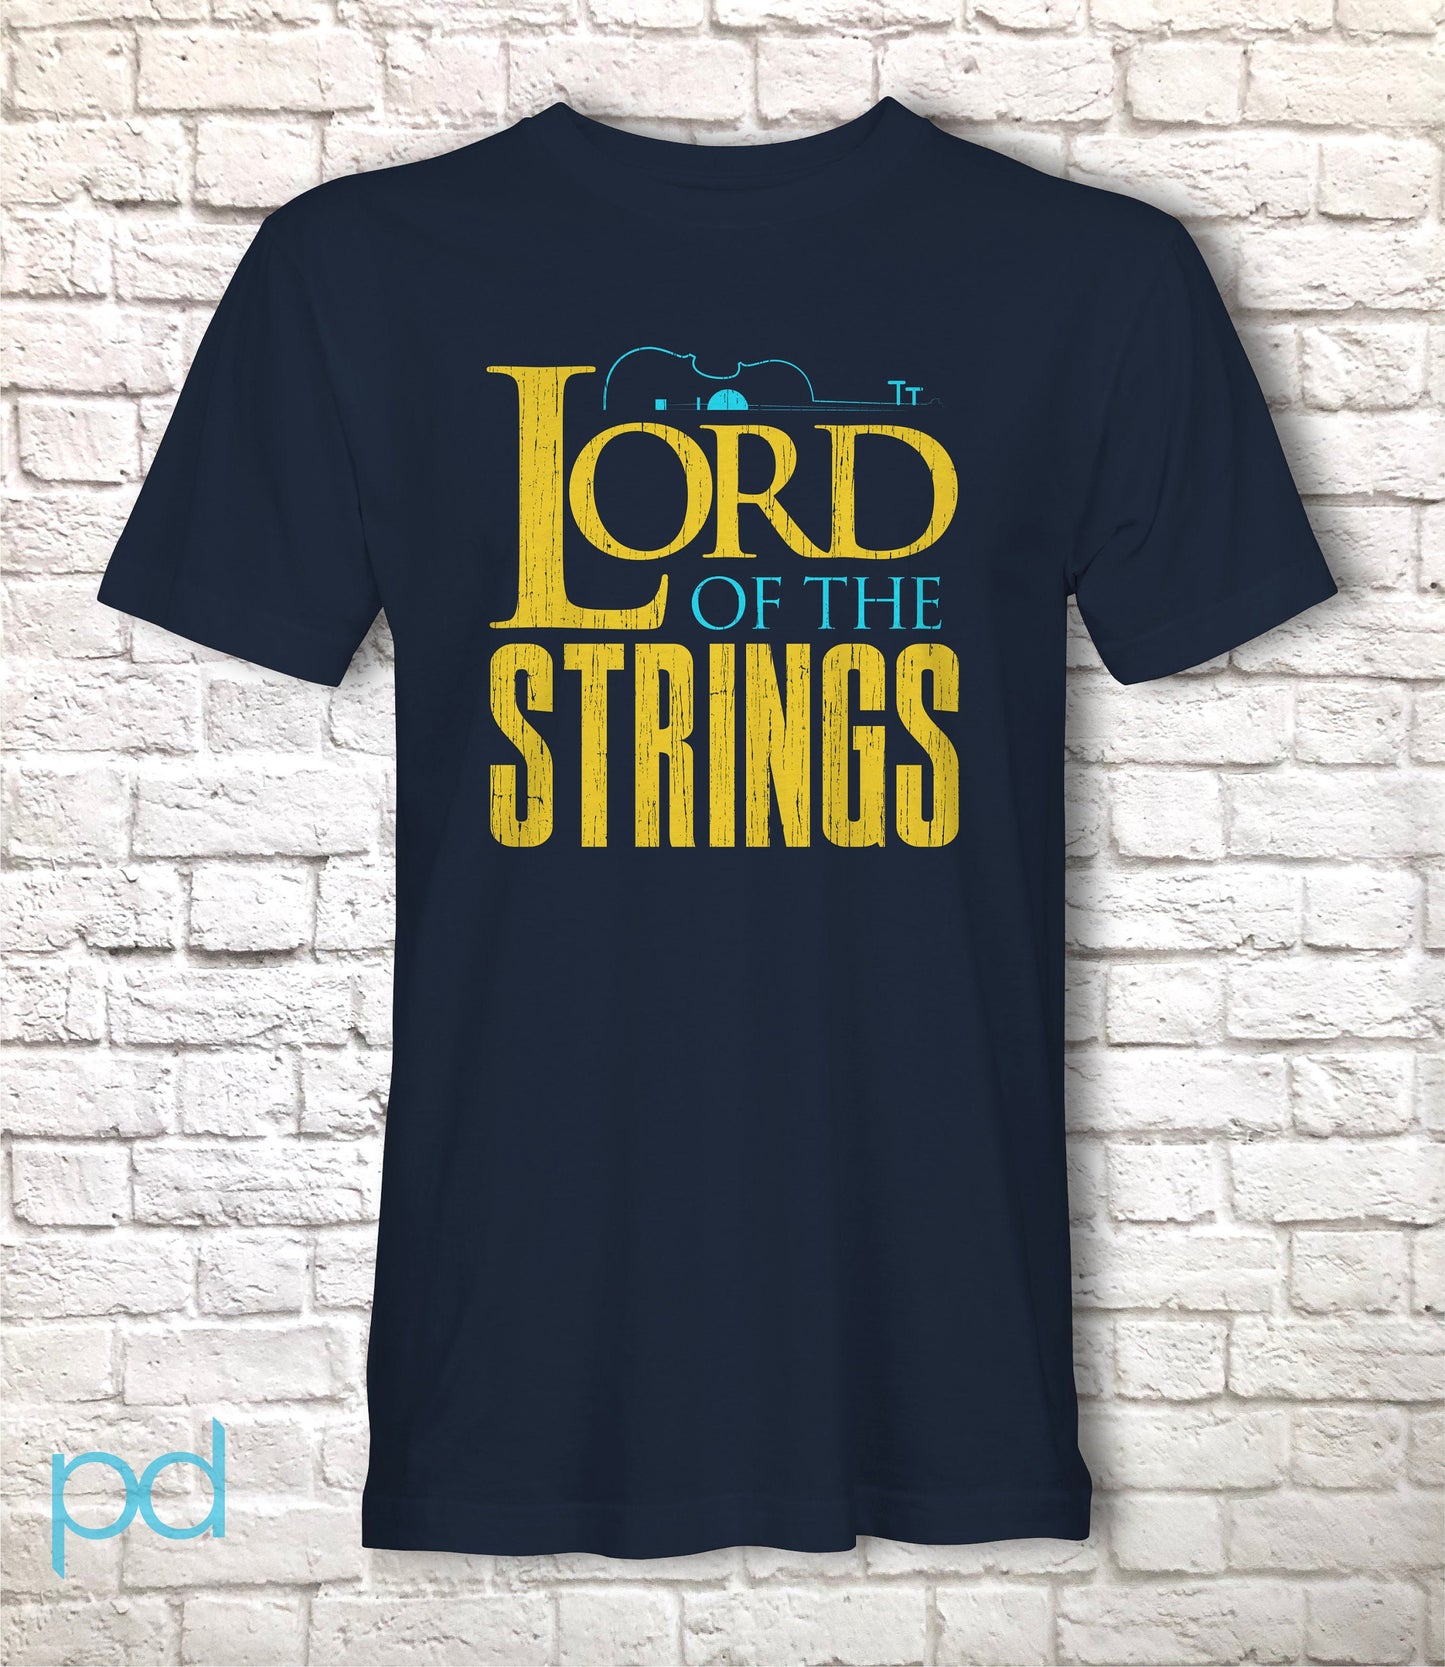 Funny Violin T-Shirt, Violinist Fiddle Player Gift Idea Tee Shirt Top, Lord Of The Strings Parody Spoof